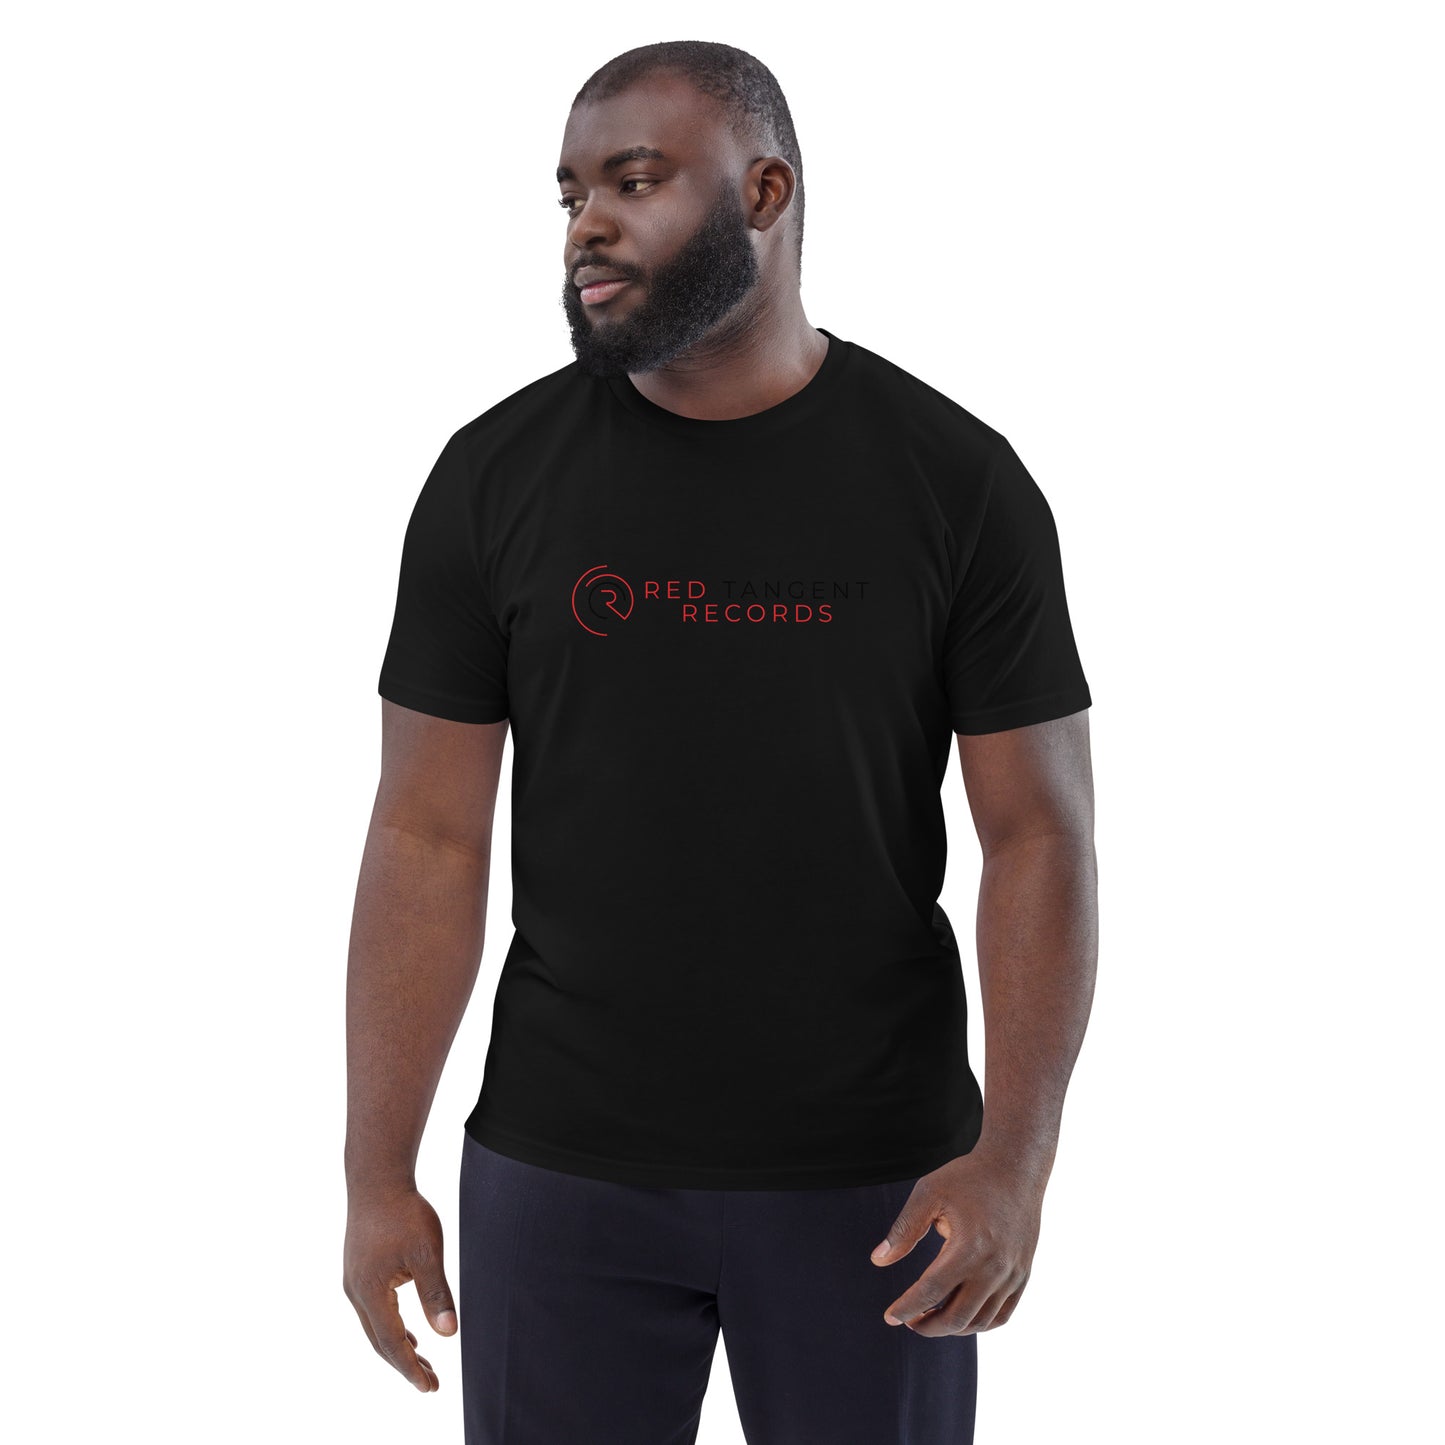 Red Tangent Records - Unisex T-shirt